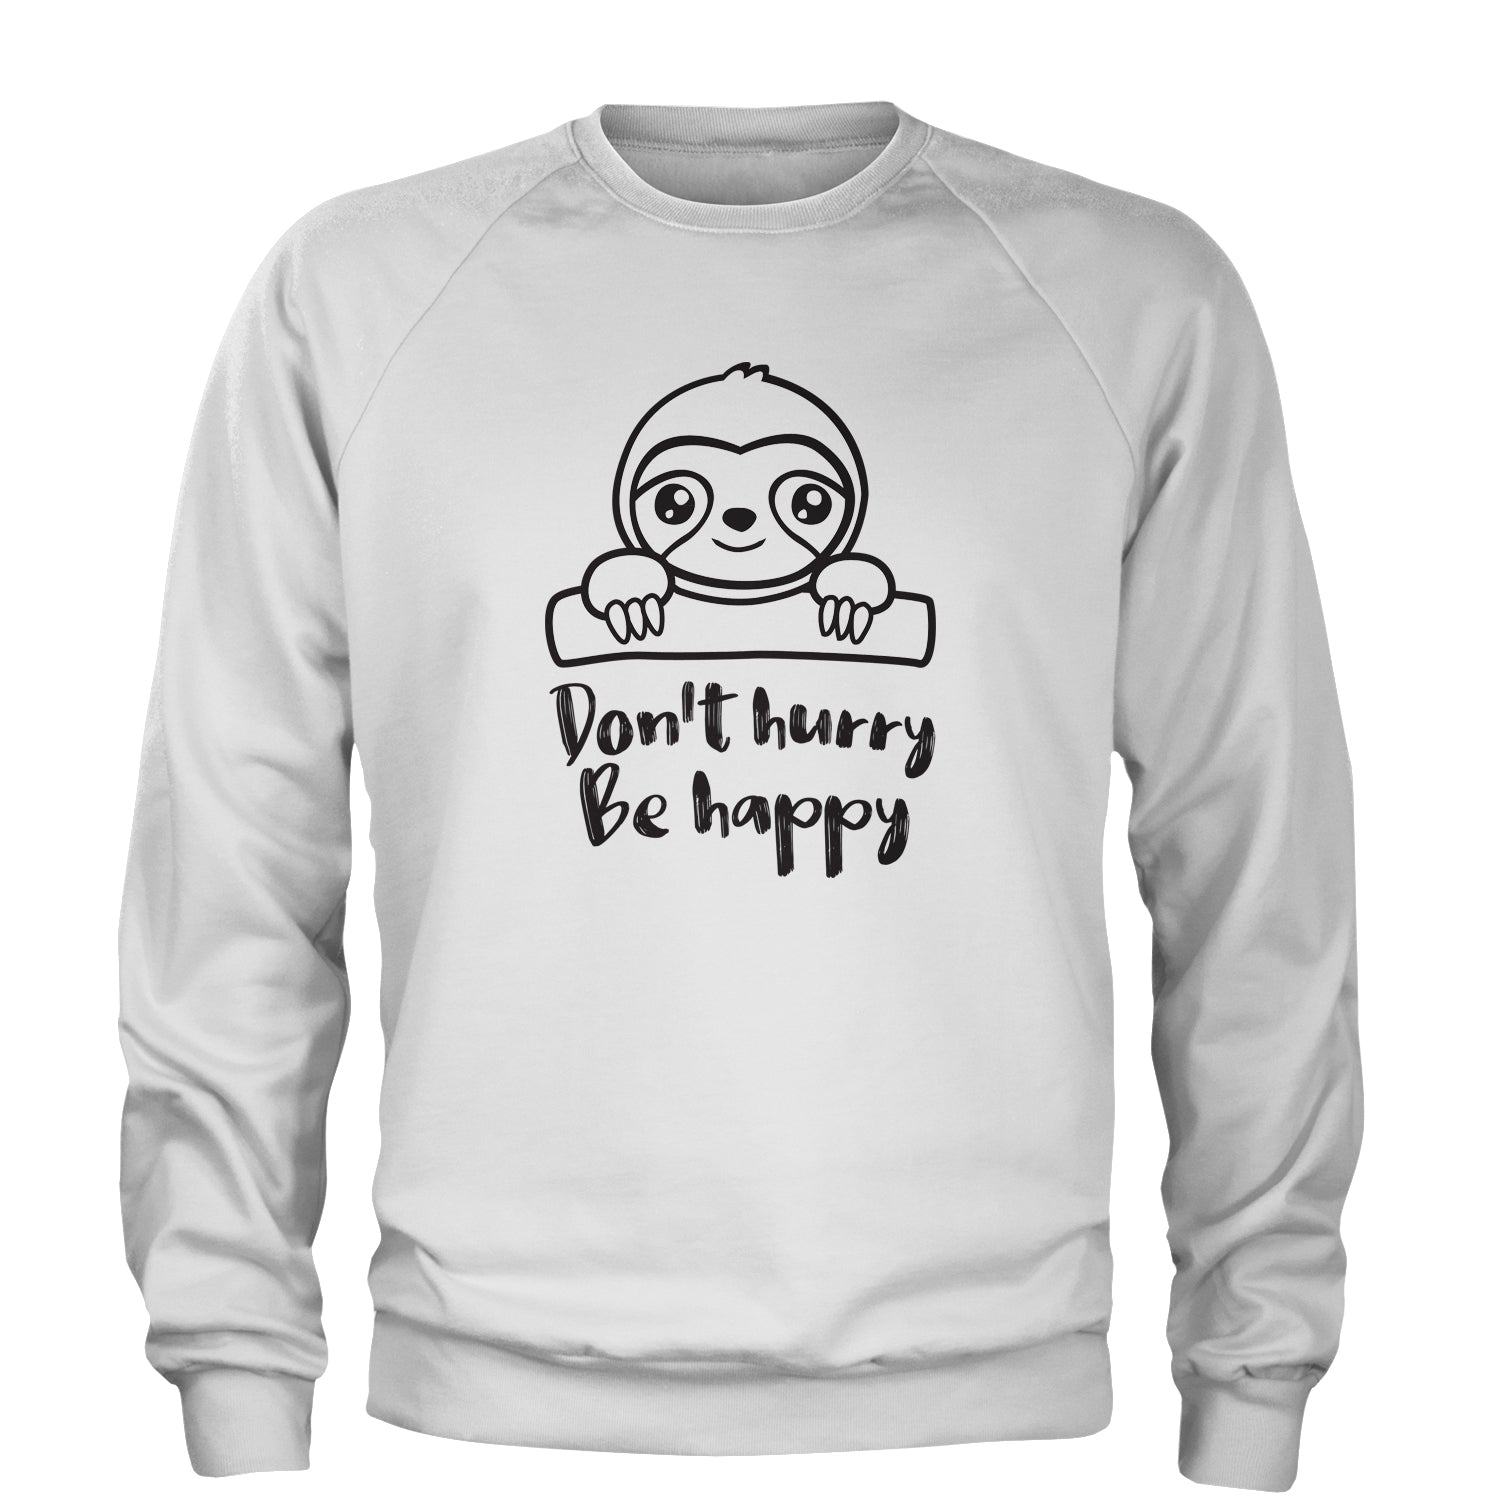 Sloth Don't Hurry Be Happy Adult Crewneck Sweatshirt fun, funny, sloth, sloths by Expression Tees